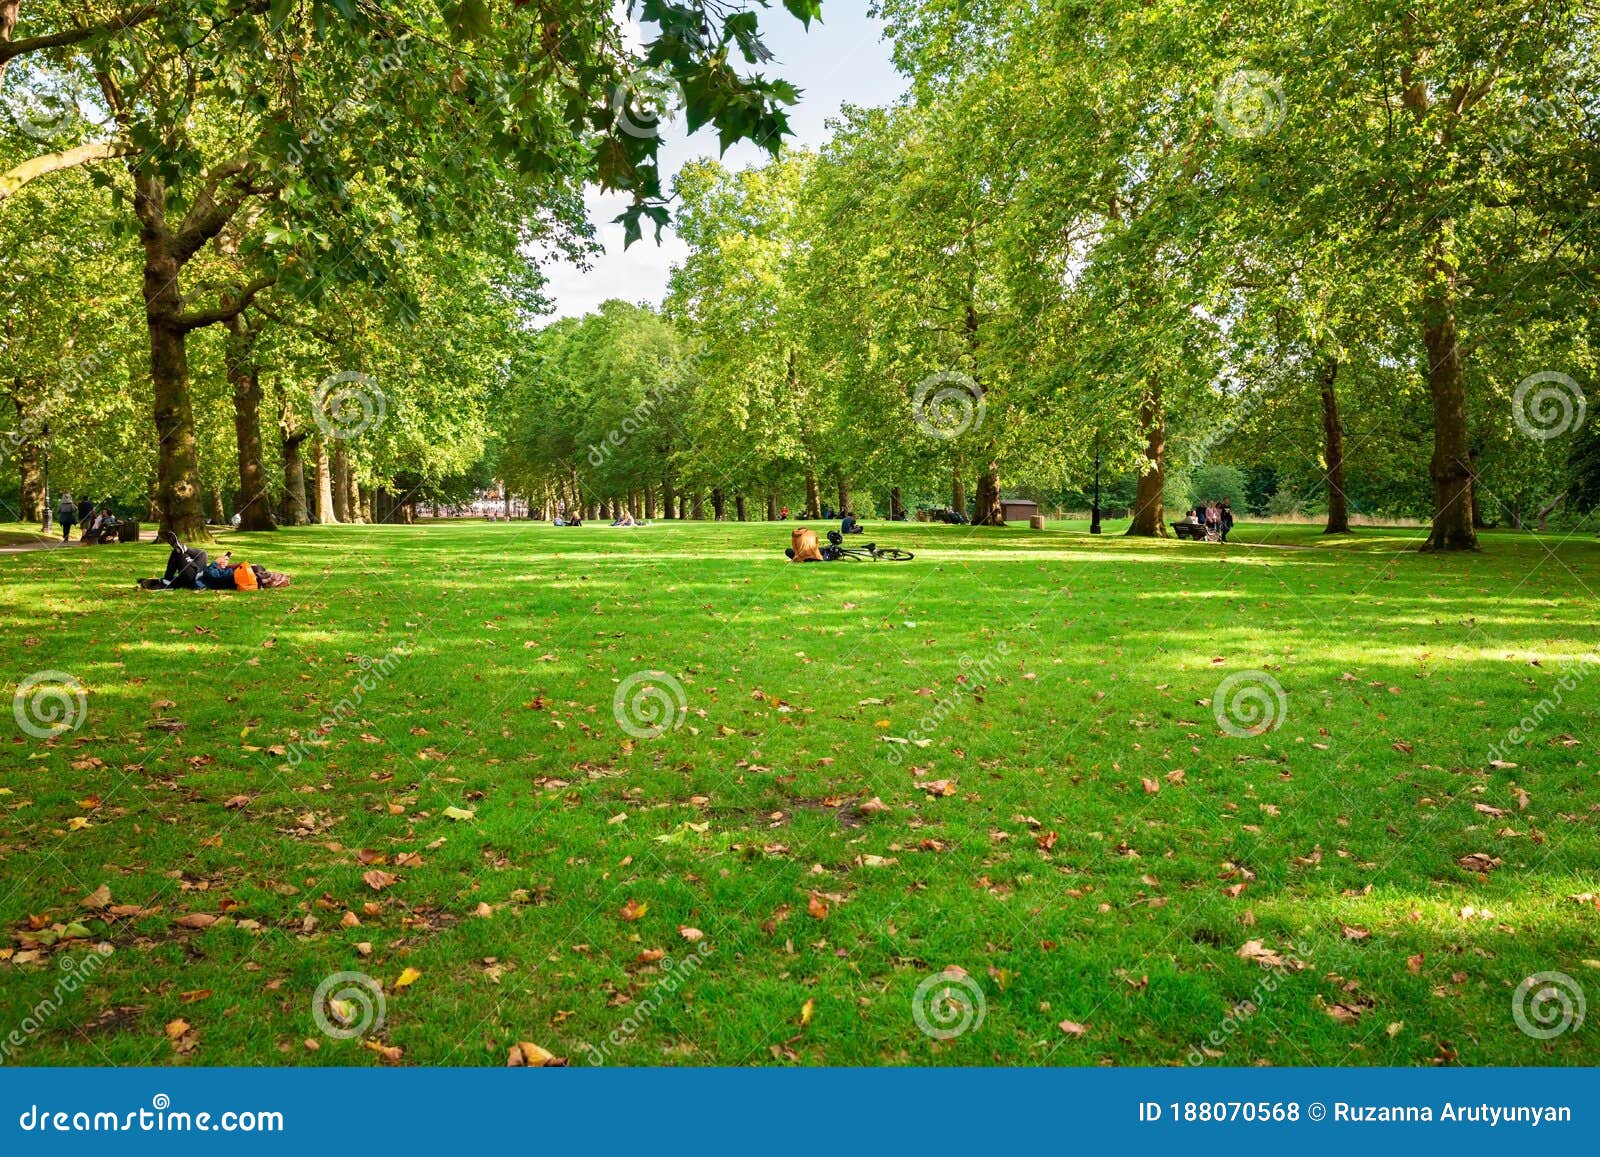 Green park in London editorial stock photo. Image of england - 188070568